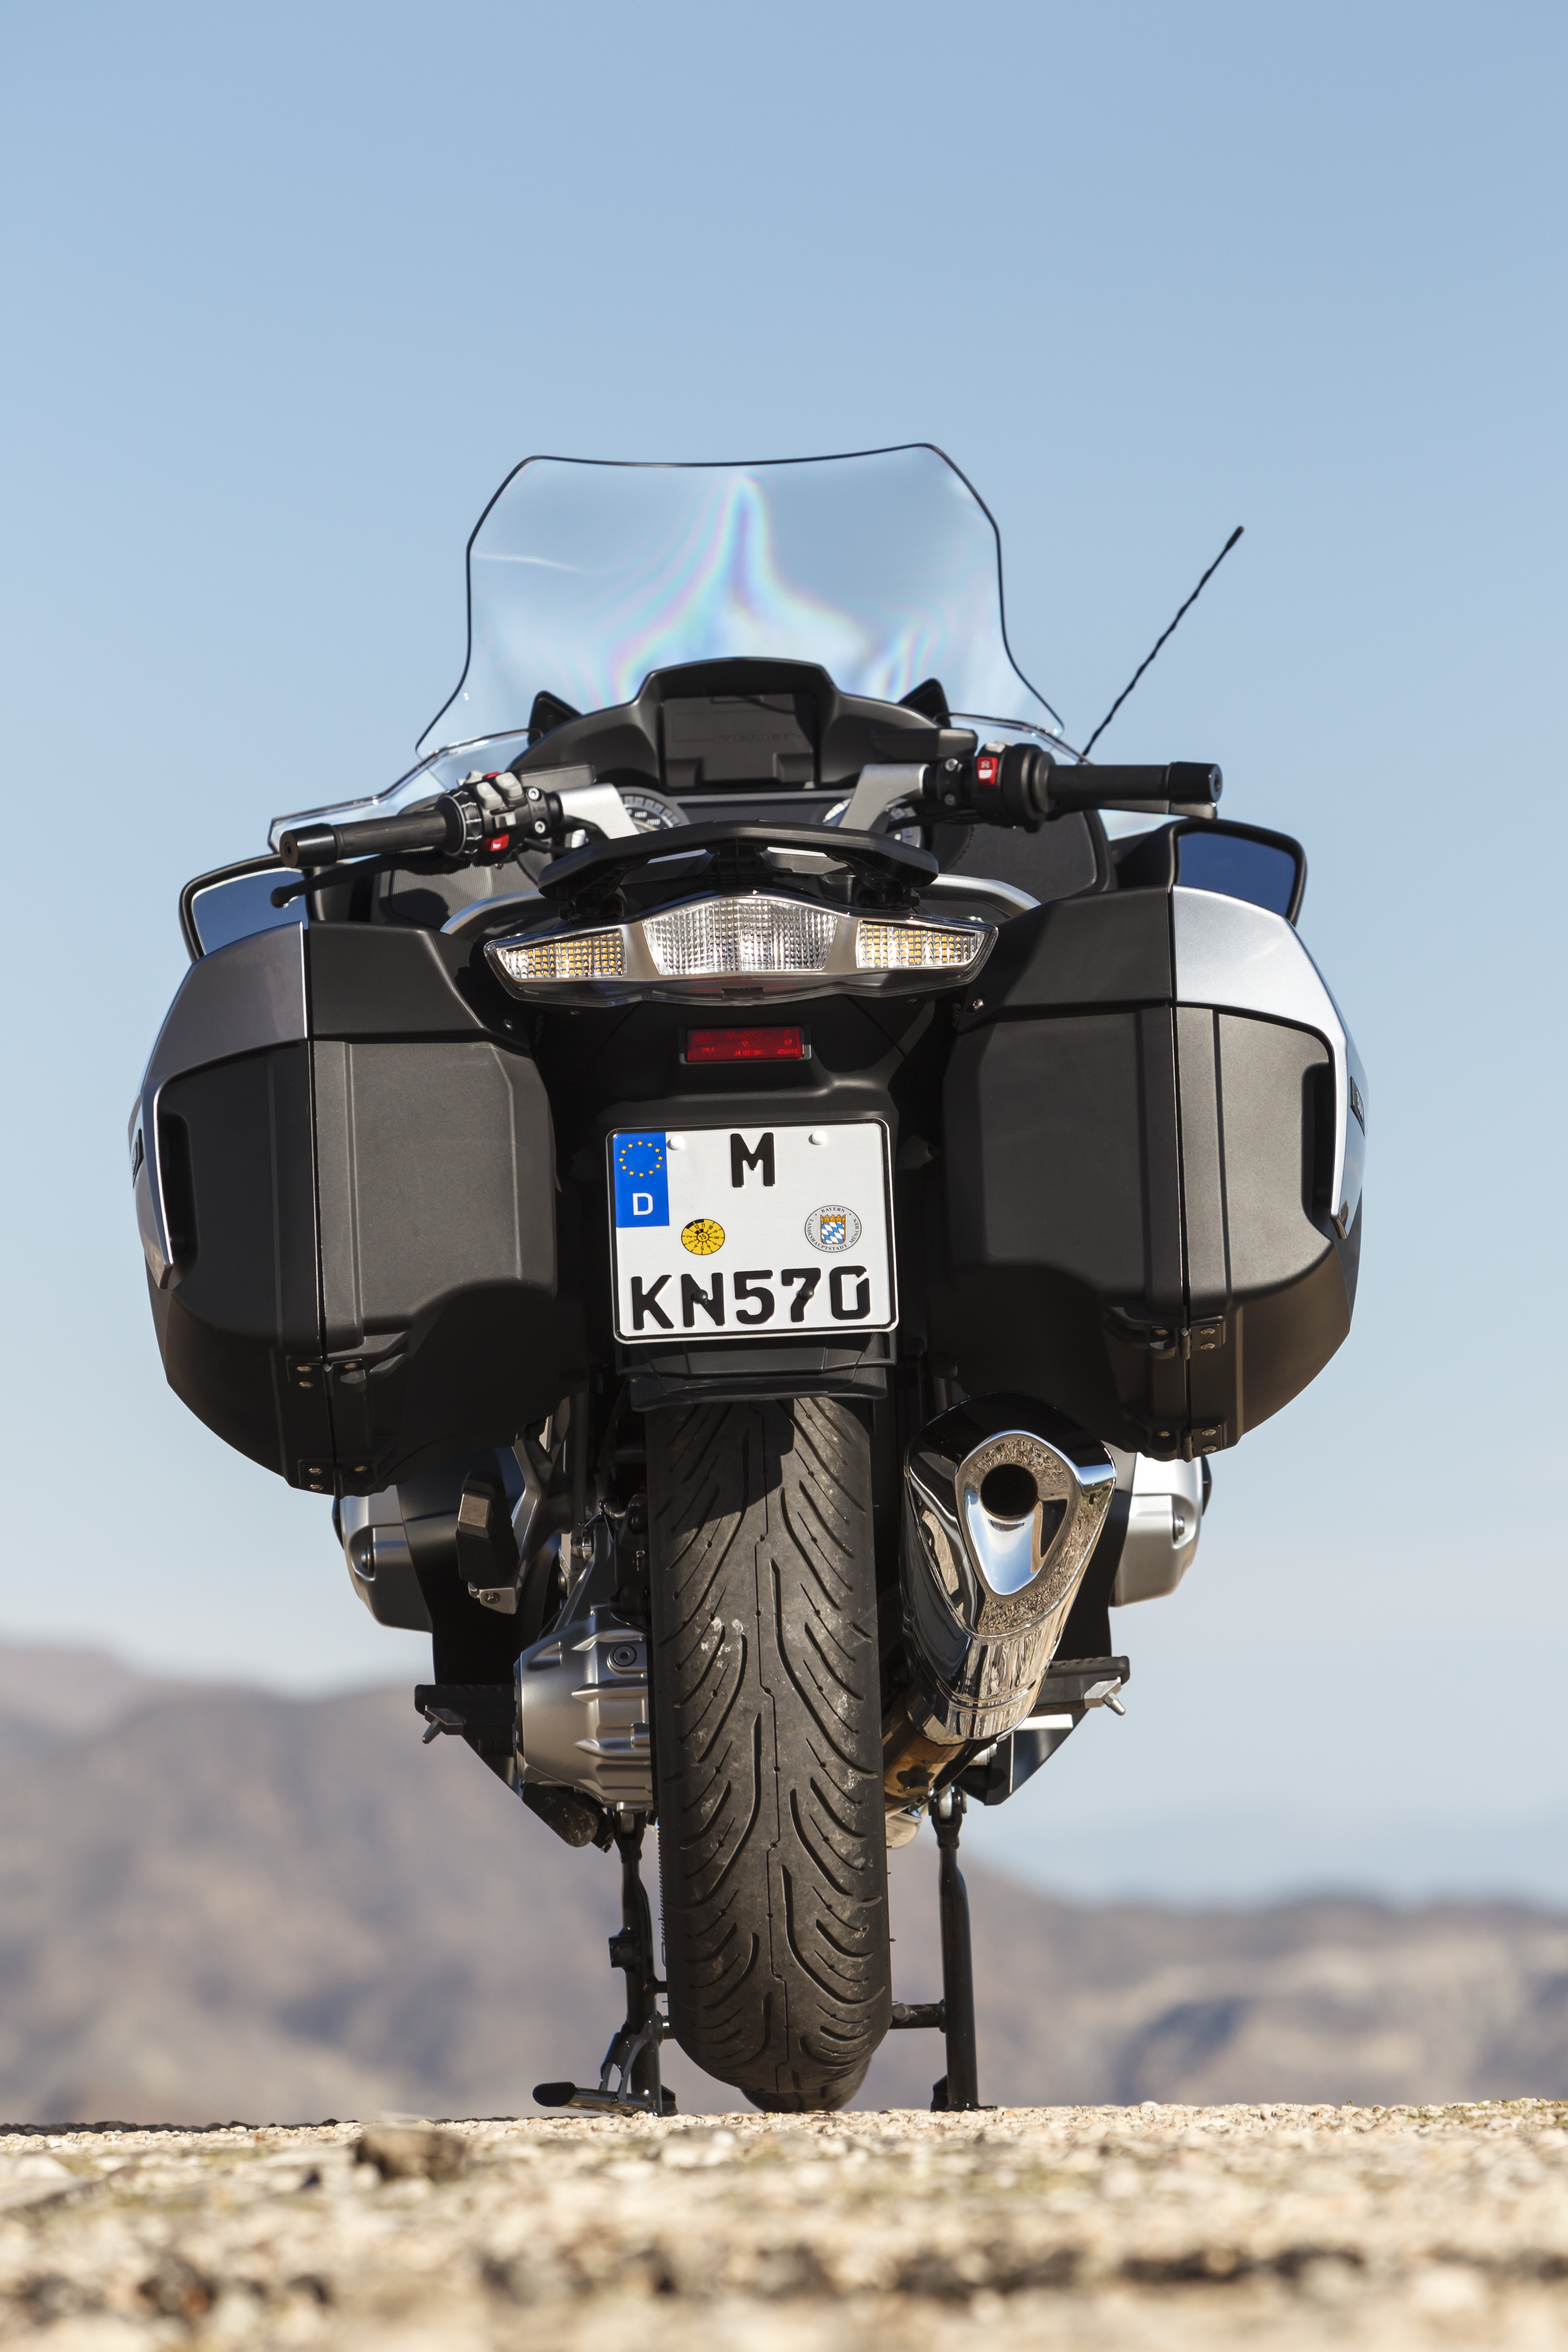 First ride: 2014 BMW R1200RT review